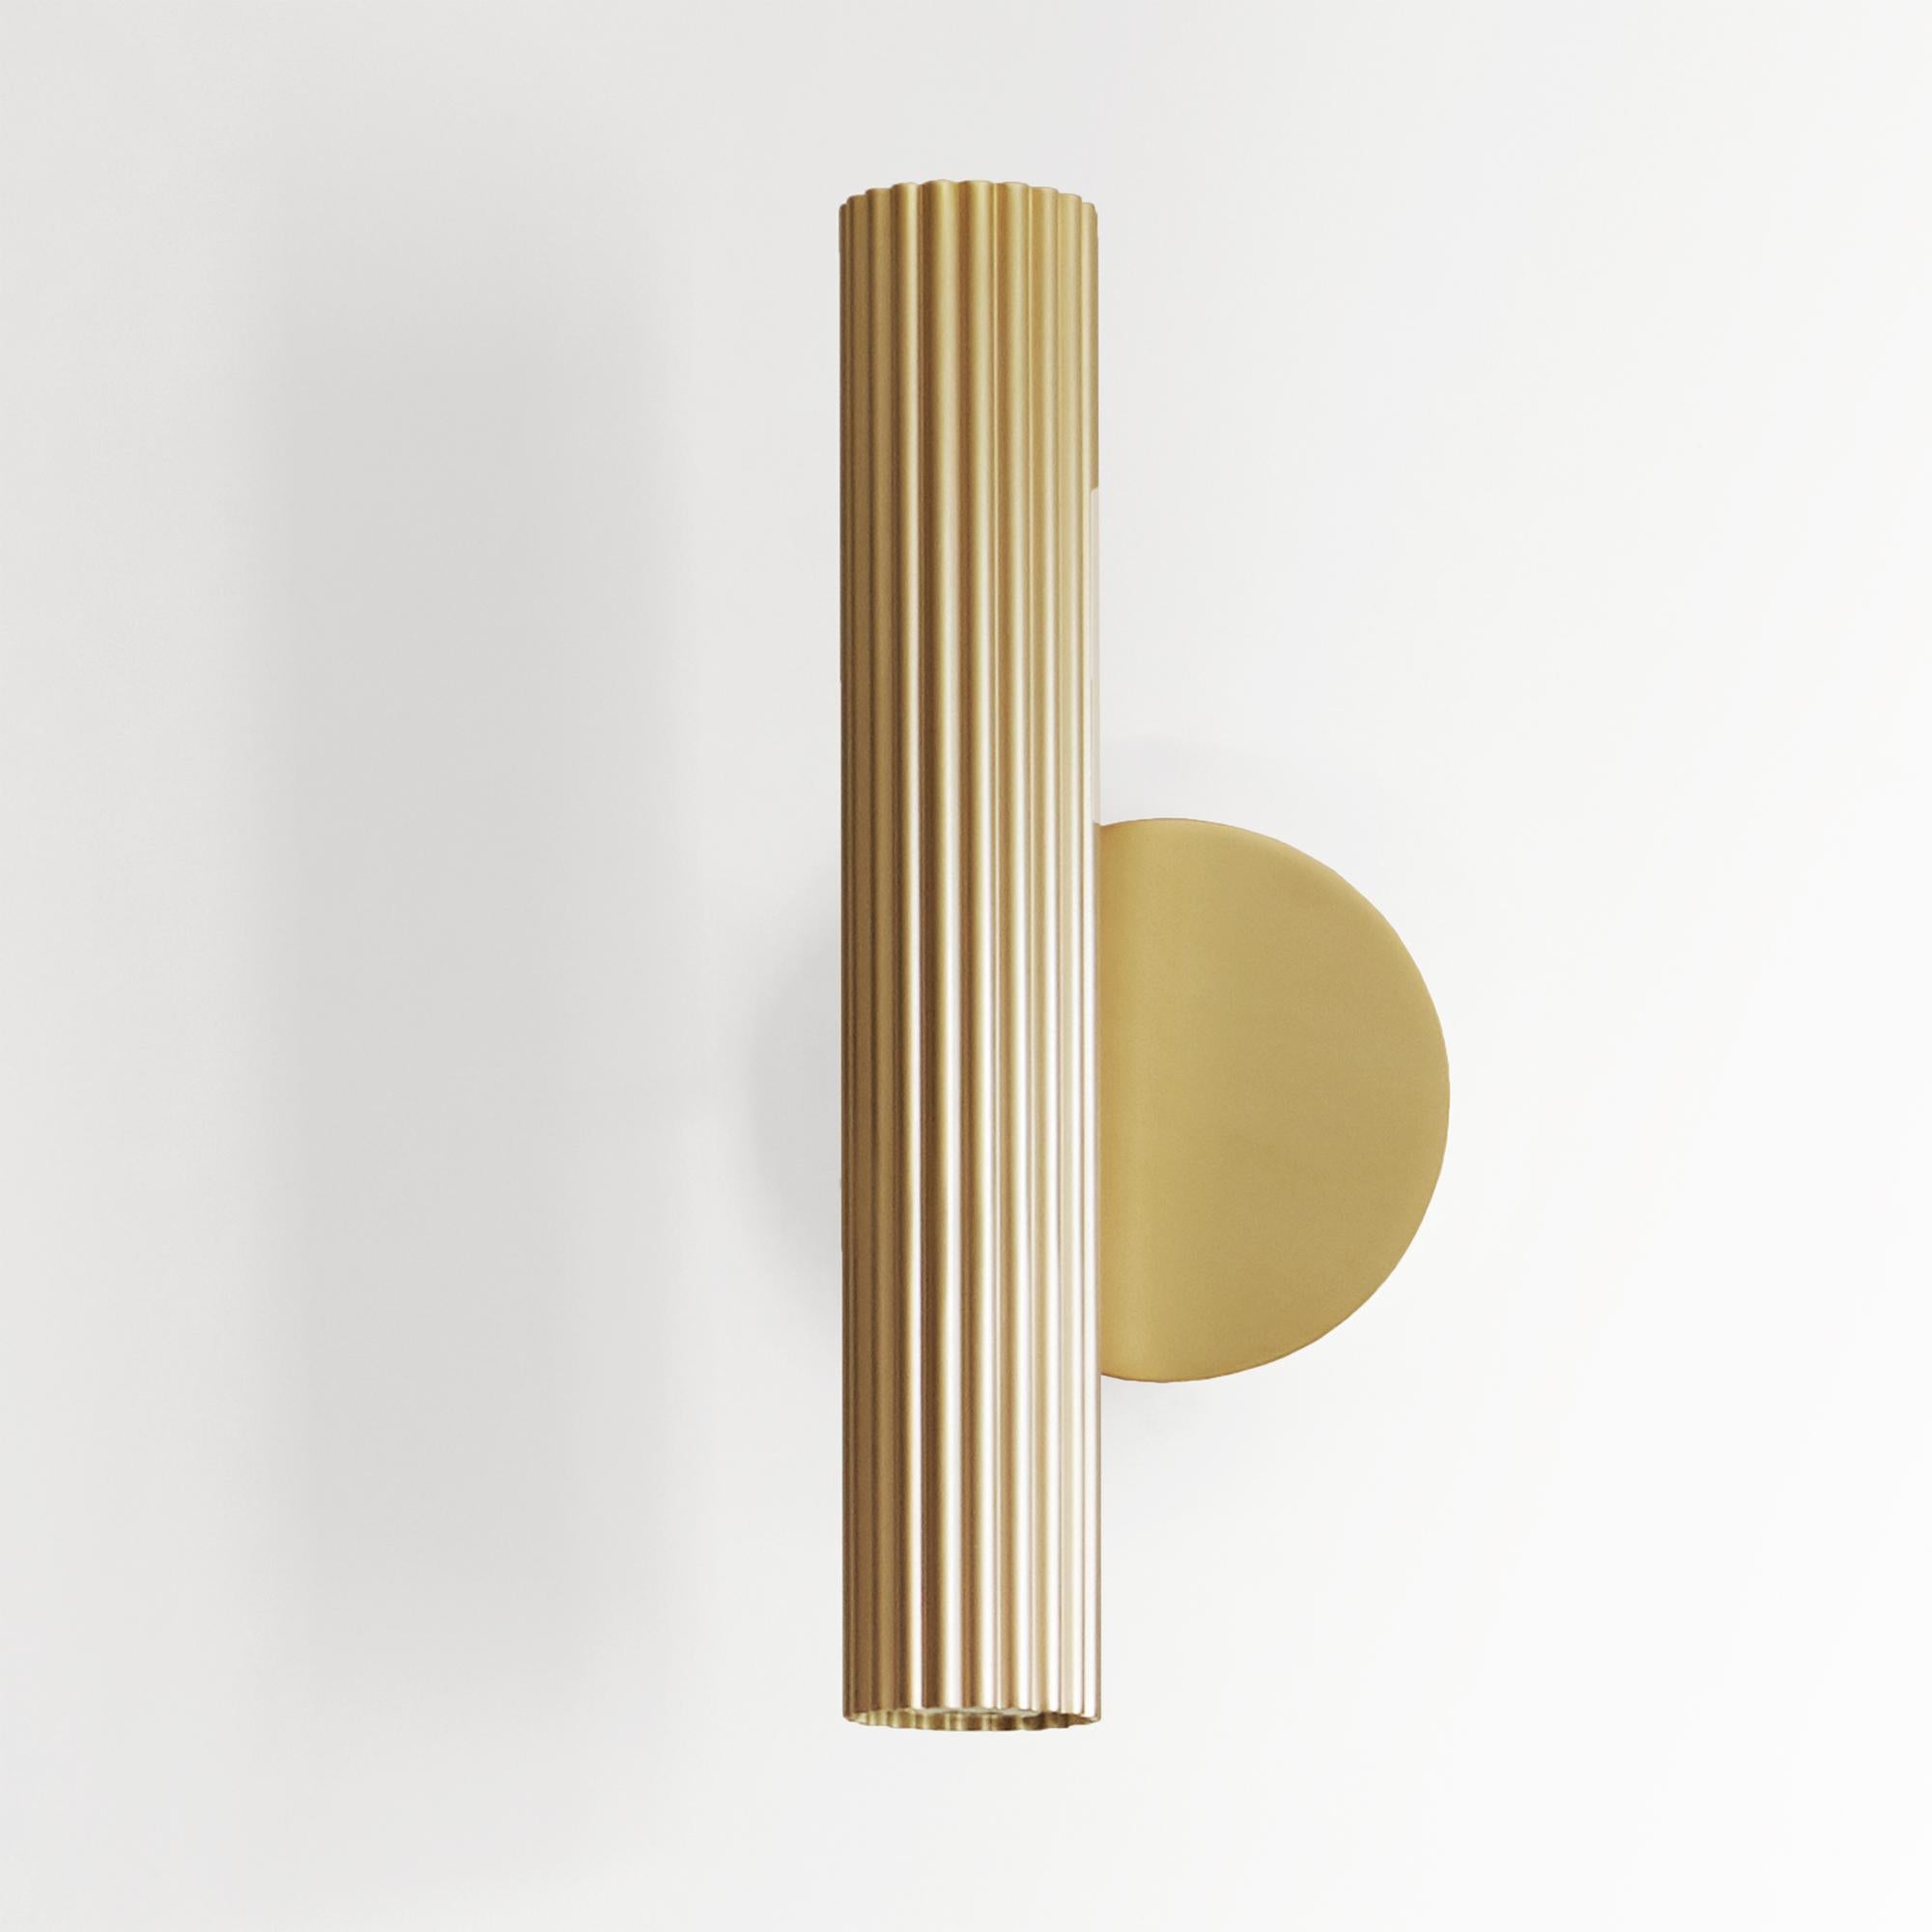 Lustrin wall lamp by Luce Tu.
Dimensions: 35 x 12.6 cm.
Materials: brass.


LUCE TU is the story of two siblings in love with Milan, their hometown.
With the aim of enhancing the historical artisan tradition of the city without losing its past